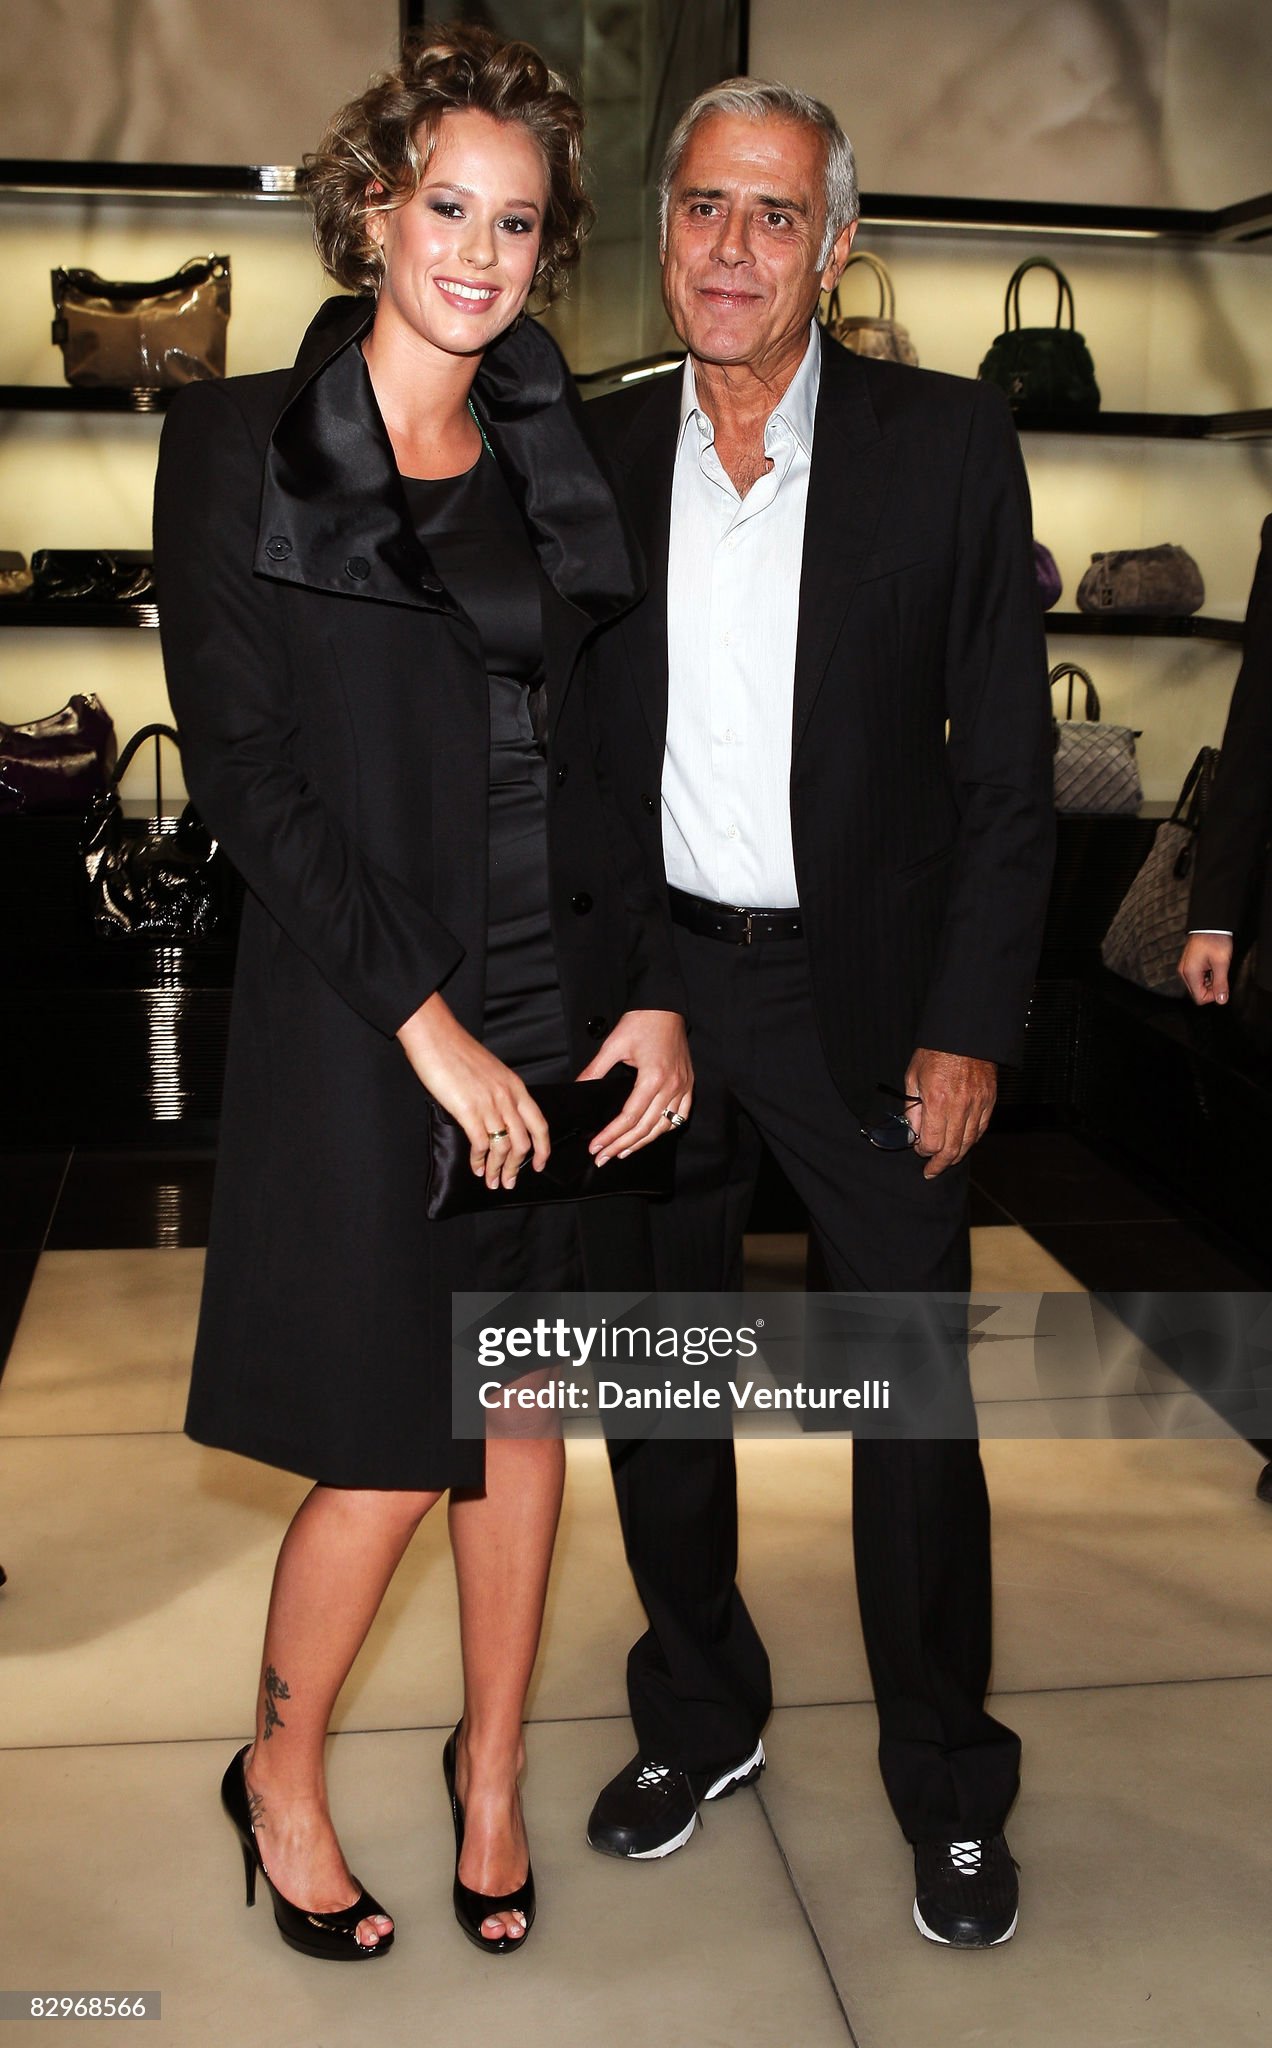 Federica Pellegrini and Teo Teocoli attend the Giorgio Armani Boutique Opening Cocktail Party during Milan Fashion Week Spring/Summer 2009 on 22 September 2008 in Milan, Italy. 